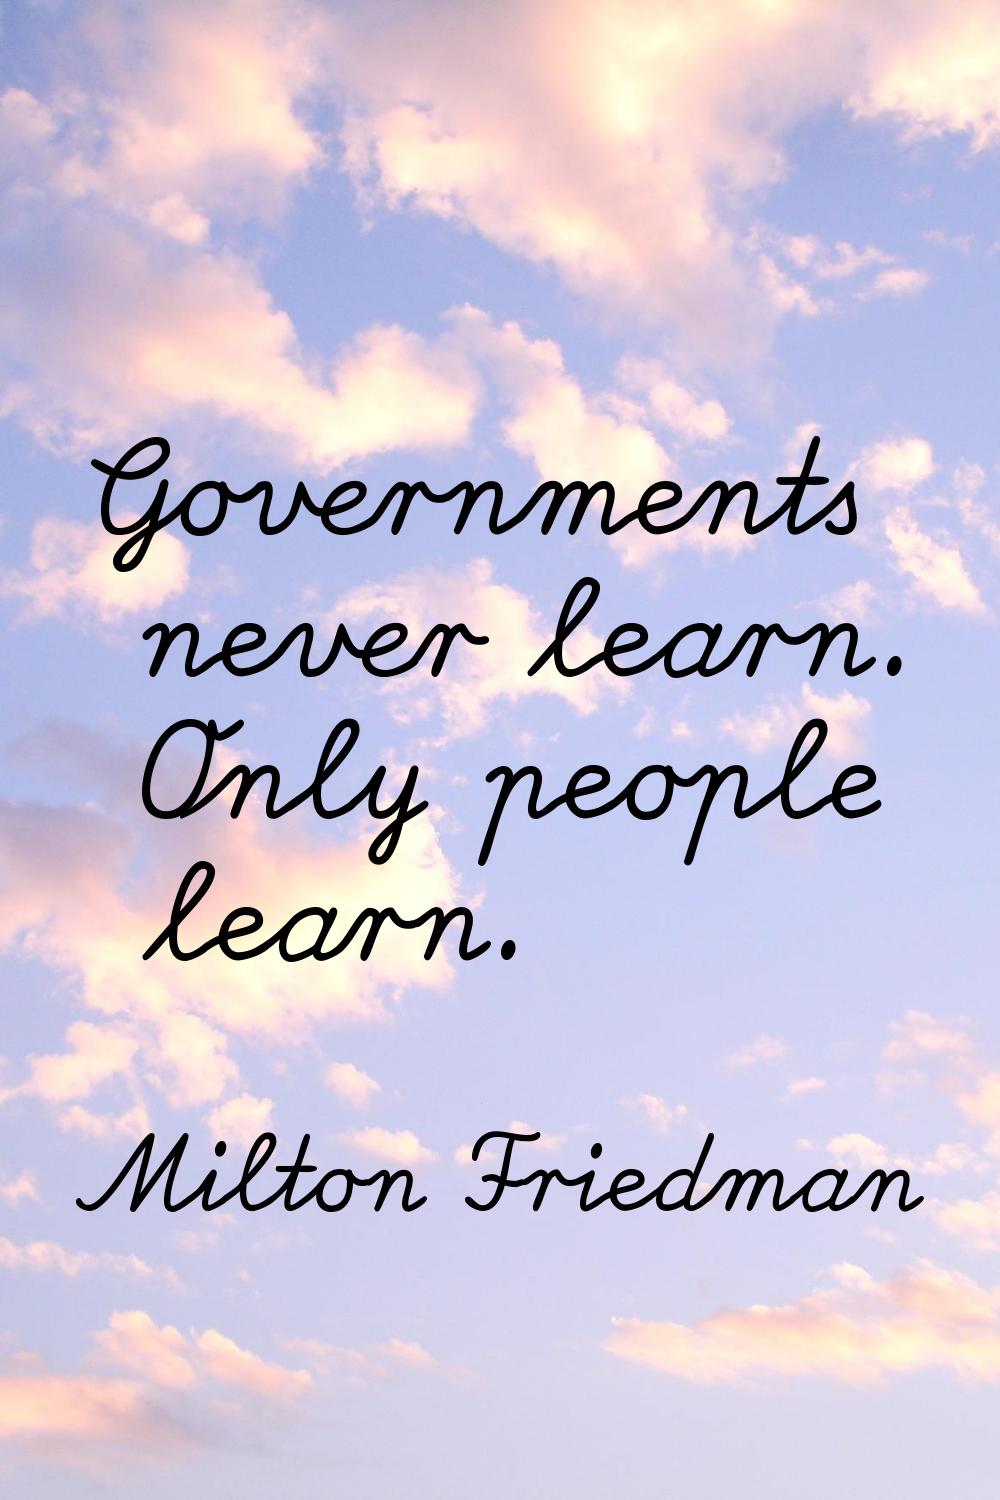 Governments never learn. Only people learn.